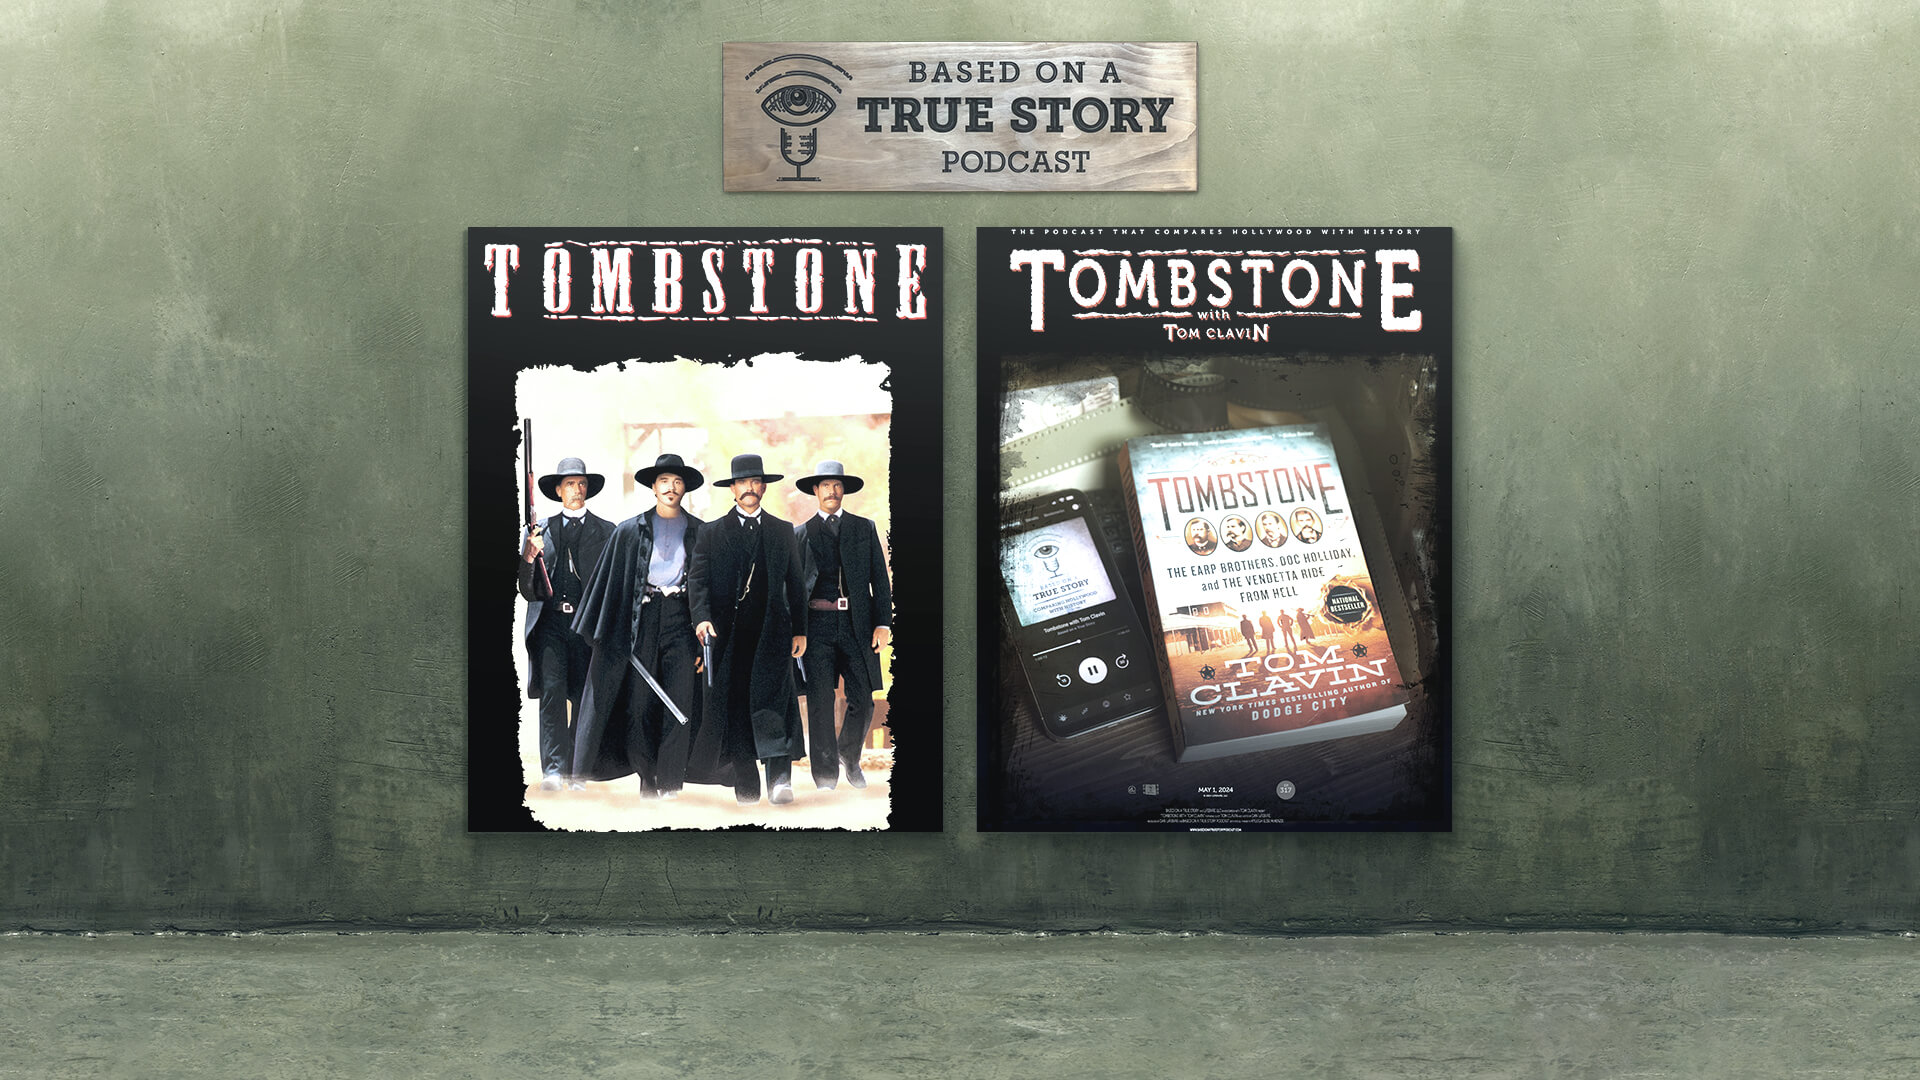 317: Tombstone with Tom Clavin | Based on a True Story Podcast